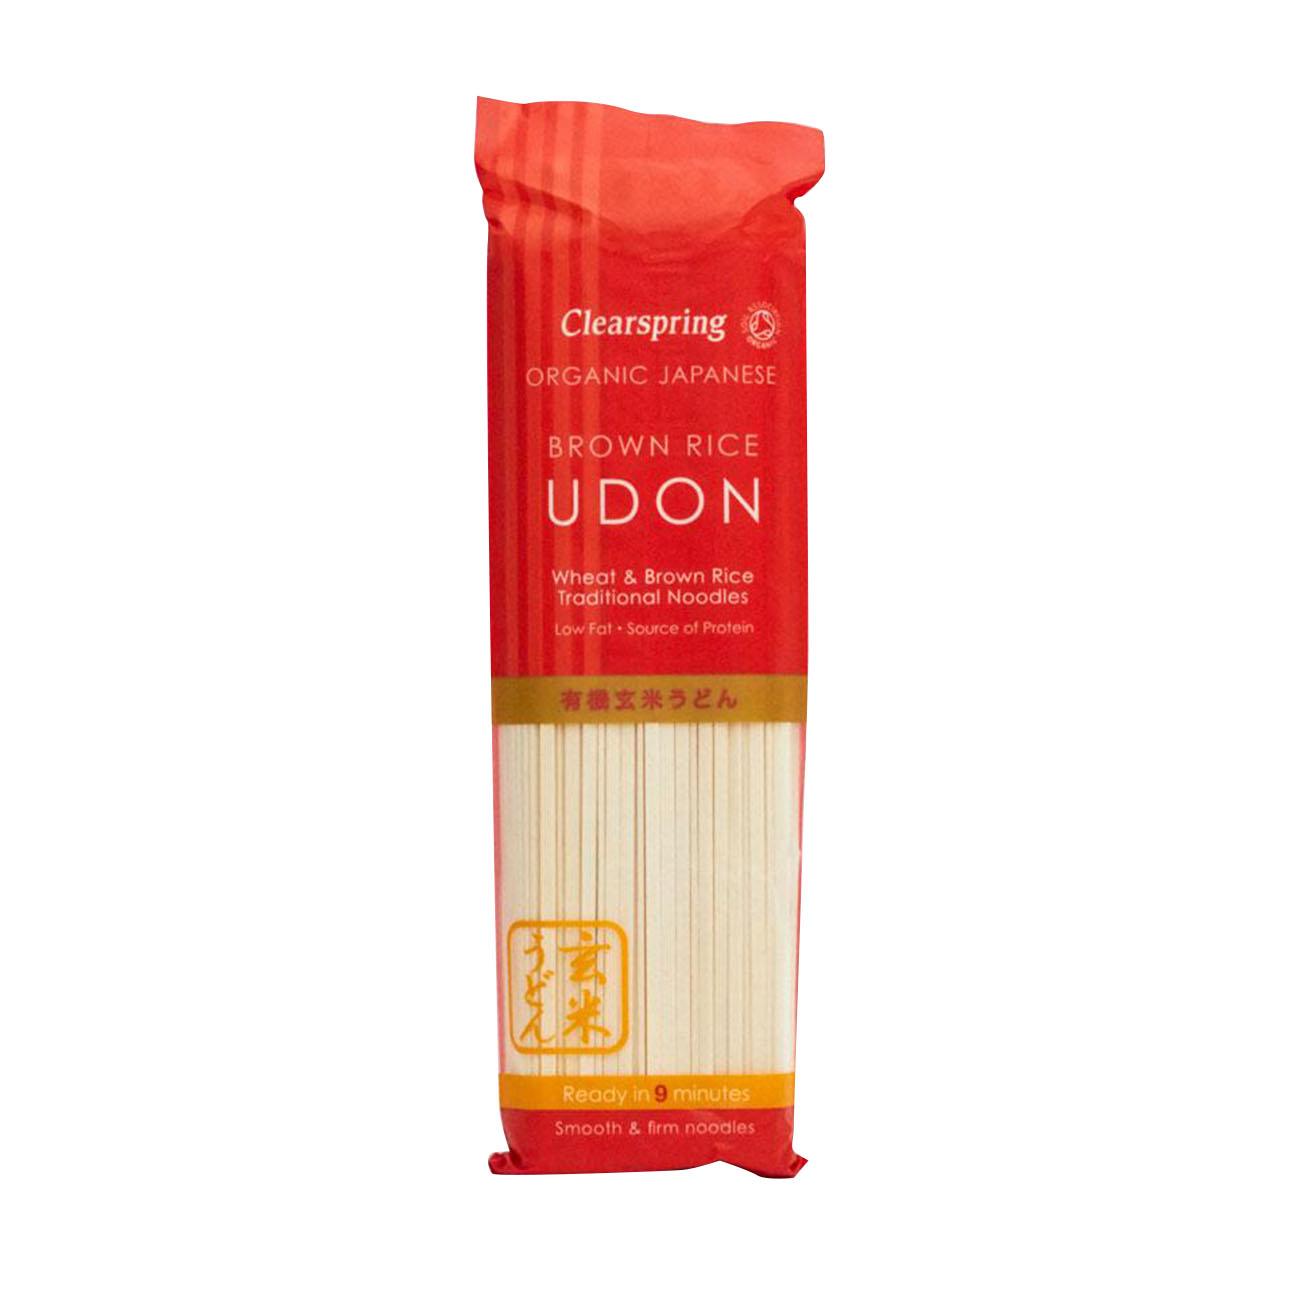 Organic Japanese Brown Rice Udon Noodles 200g